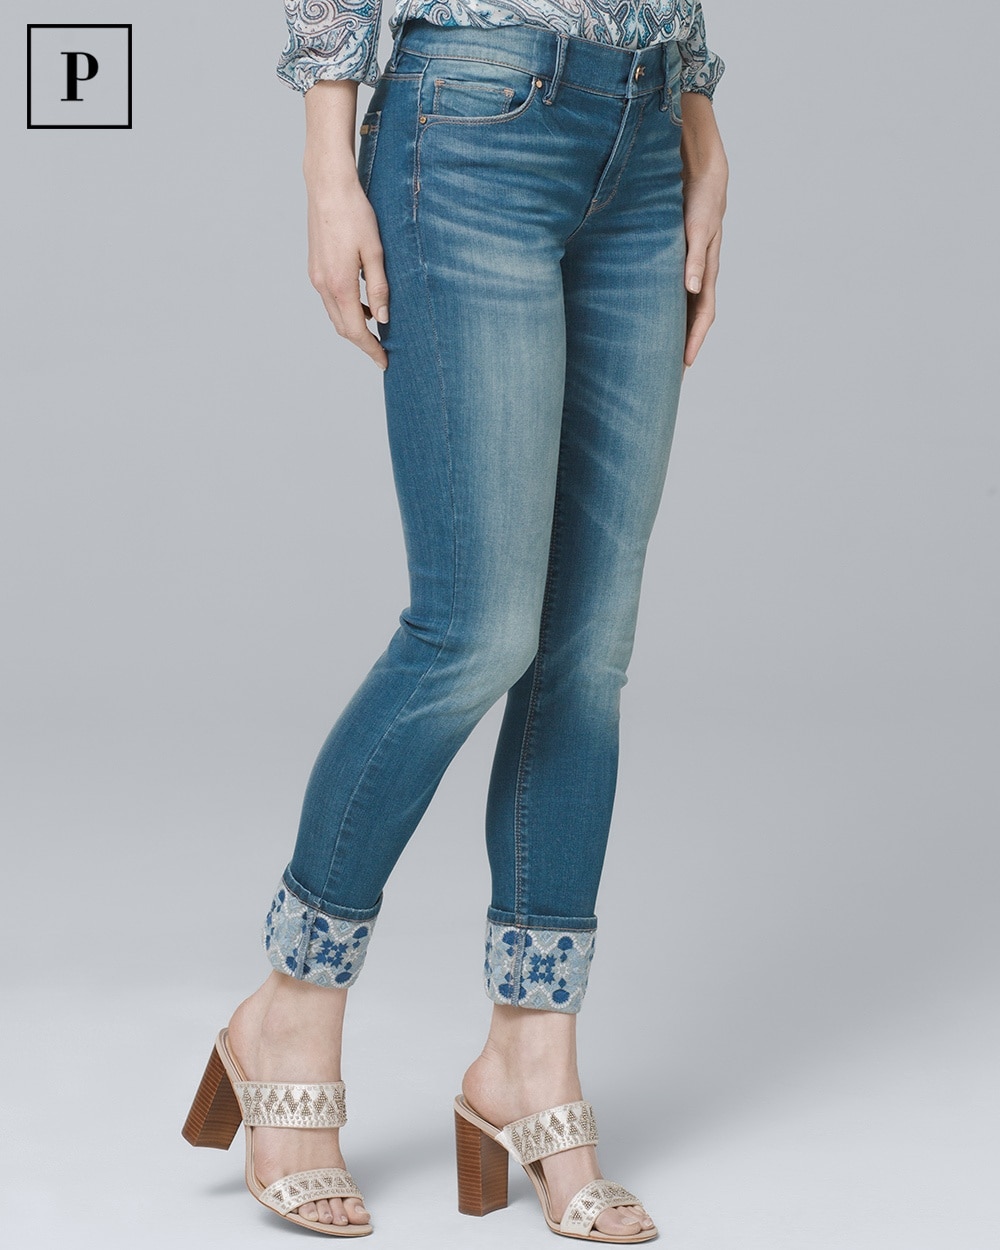 jeans with embroidered cuff